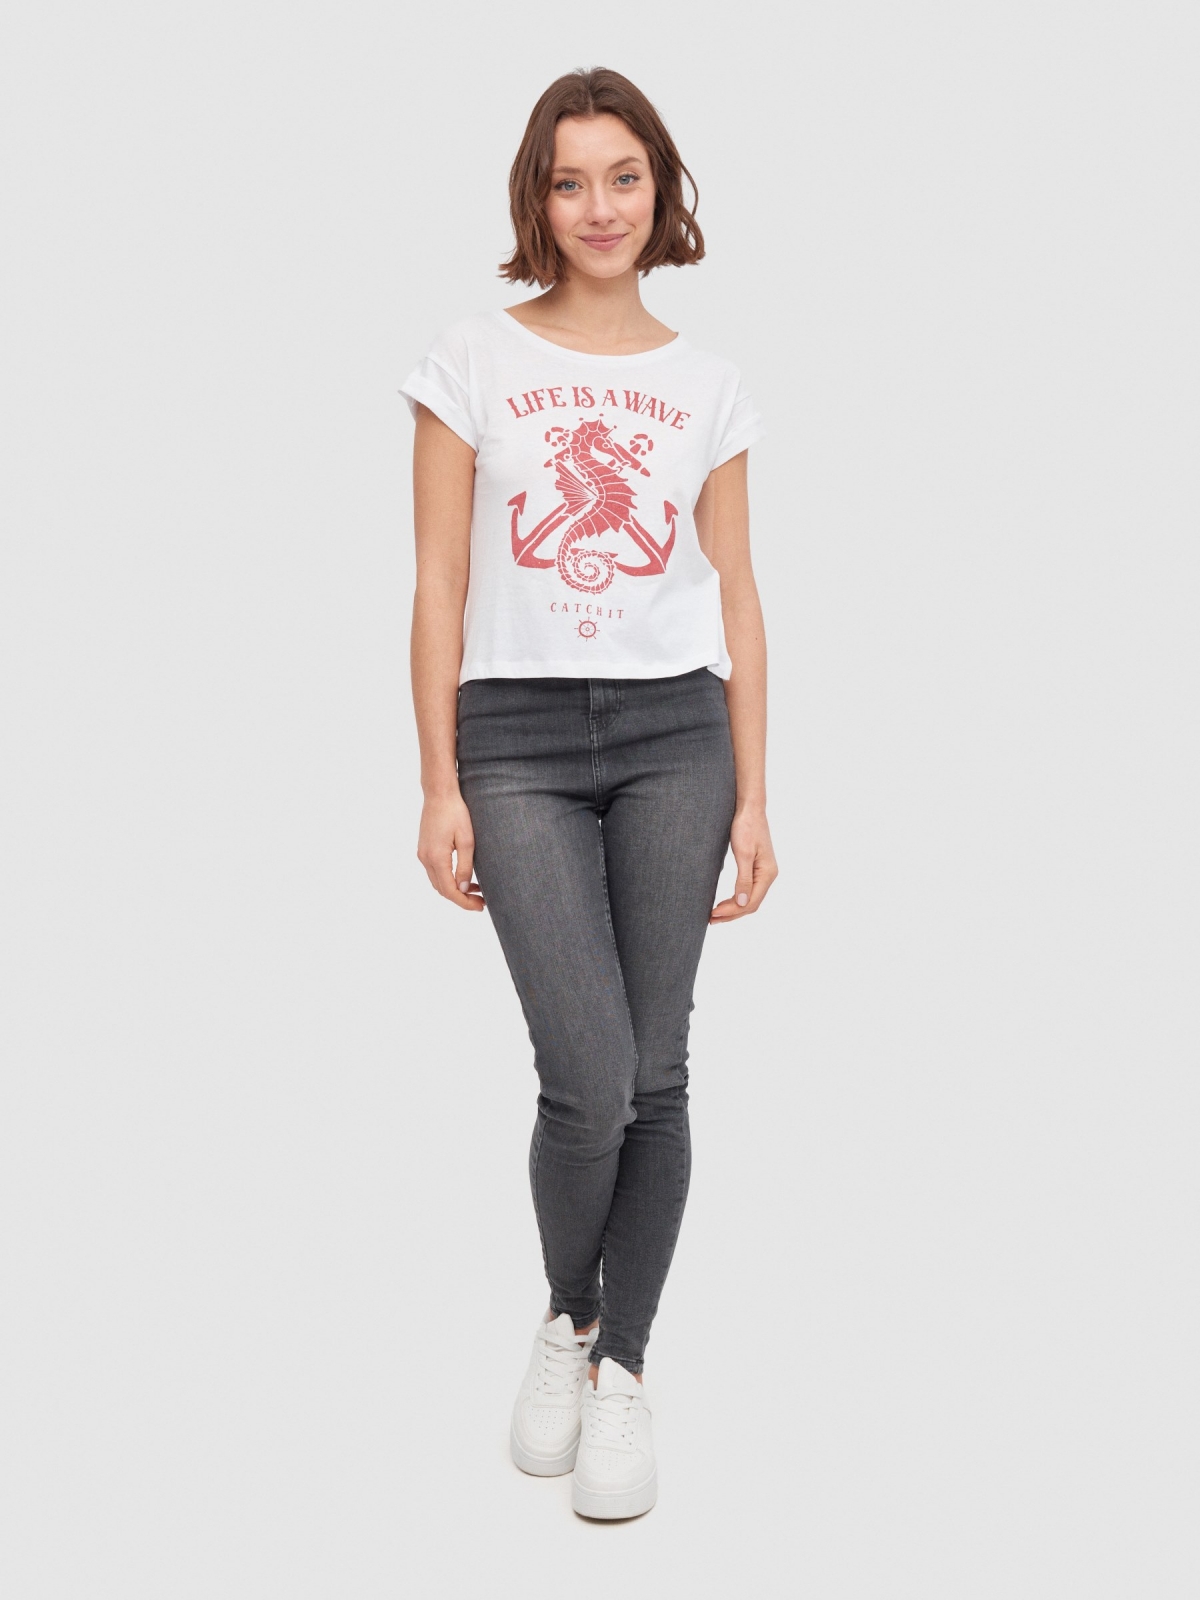 Seahorse T-shirt white front view